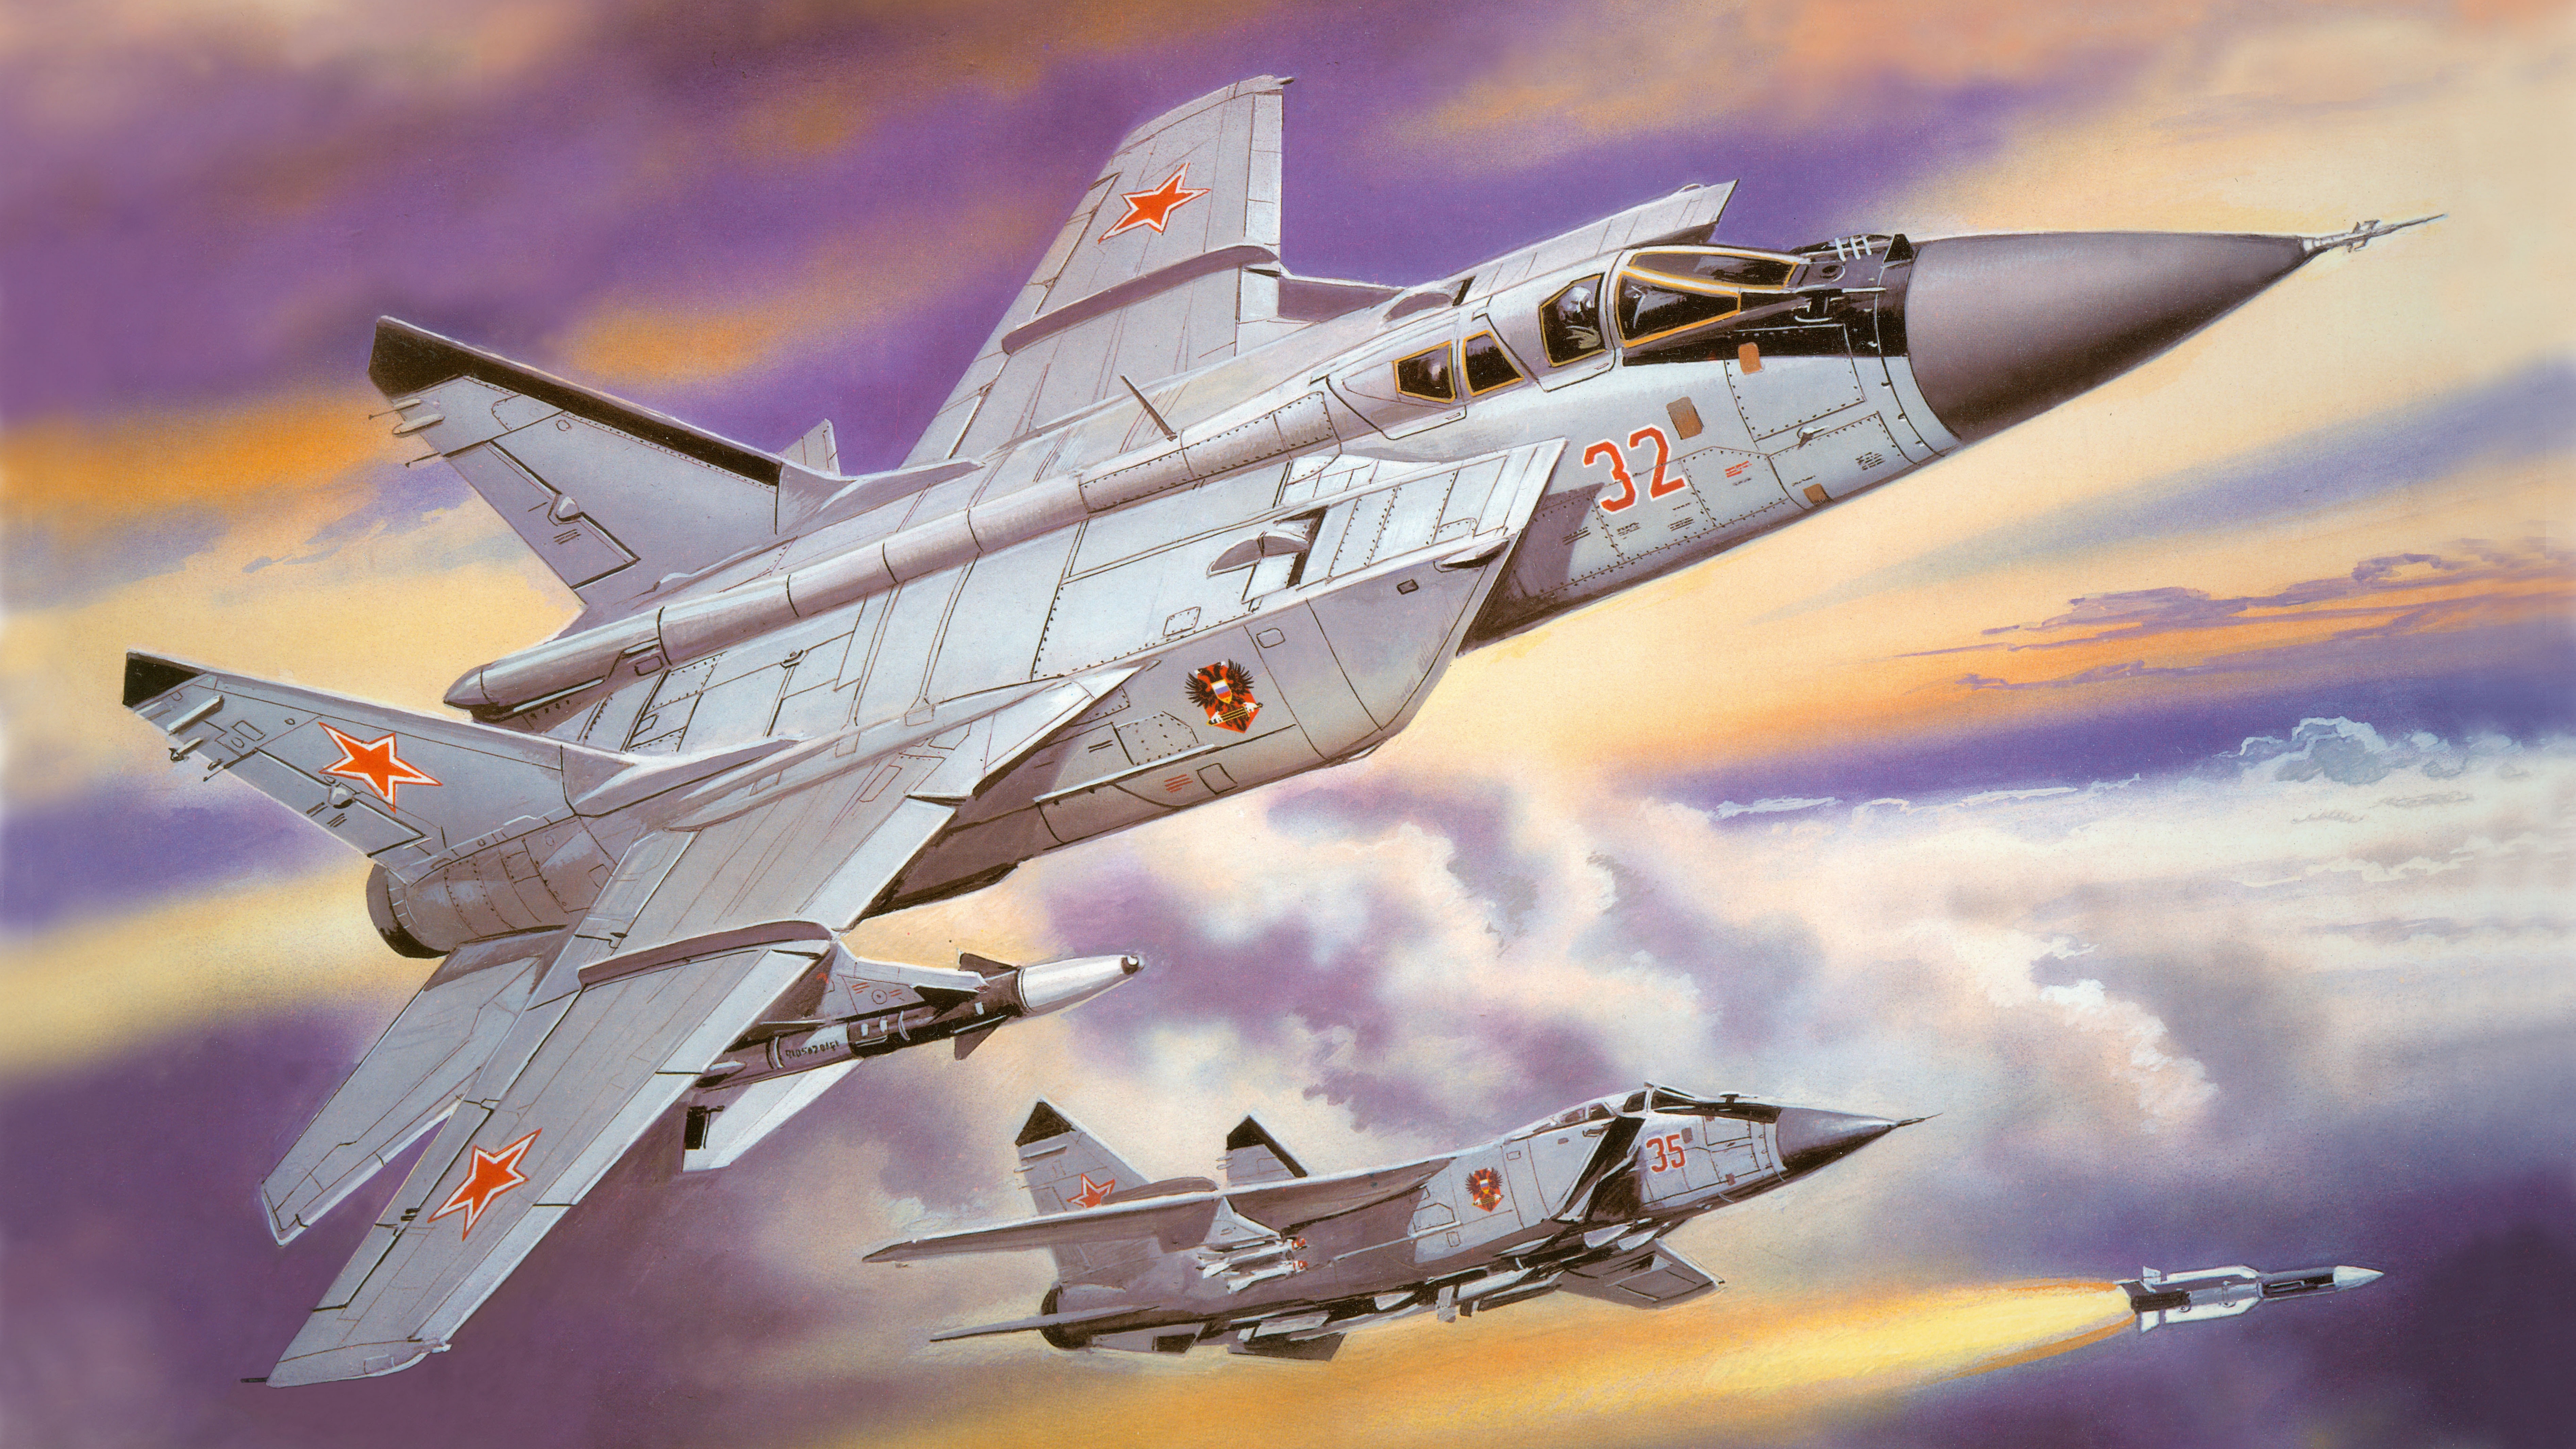 mikoyan mig 31, military, jet fighters